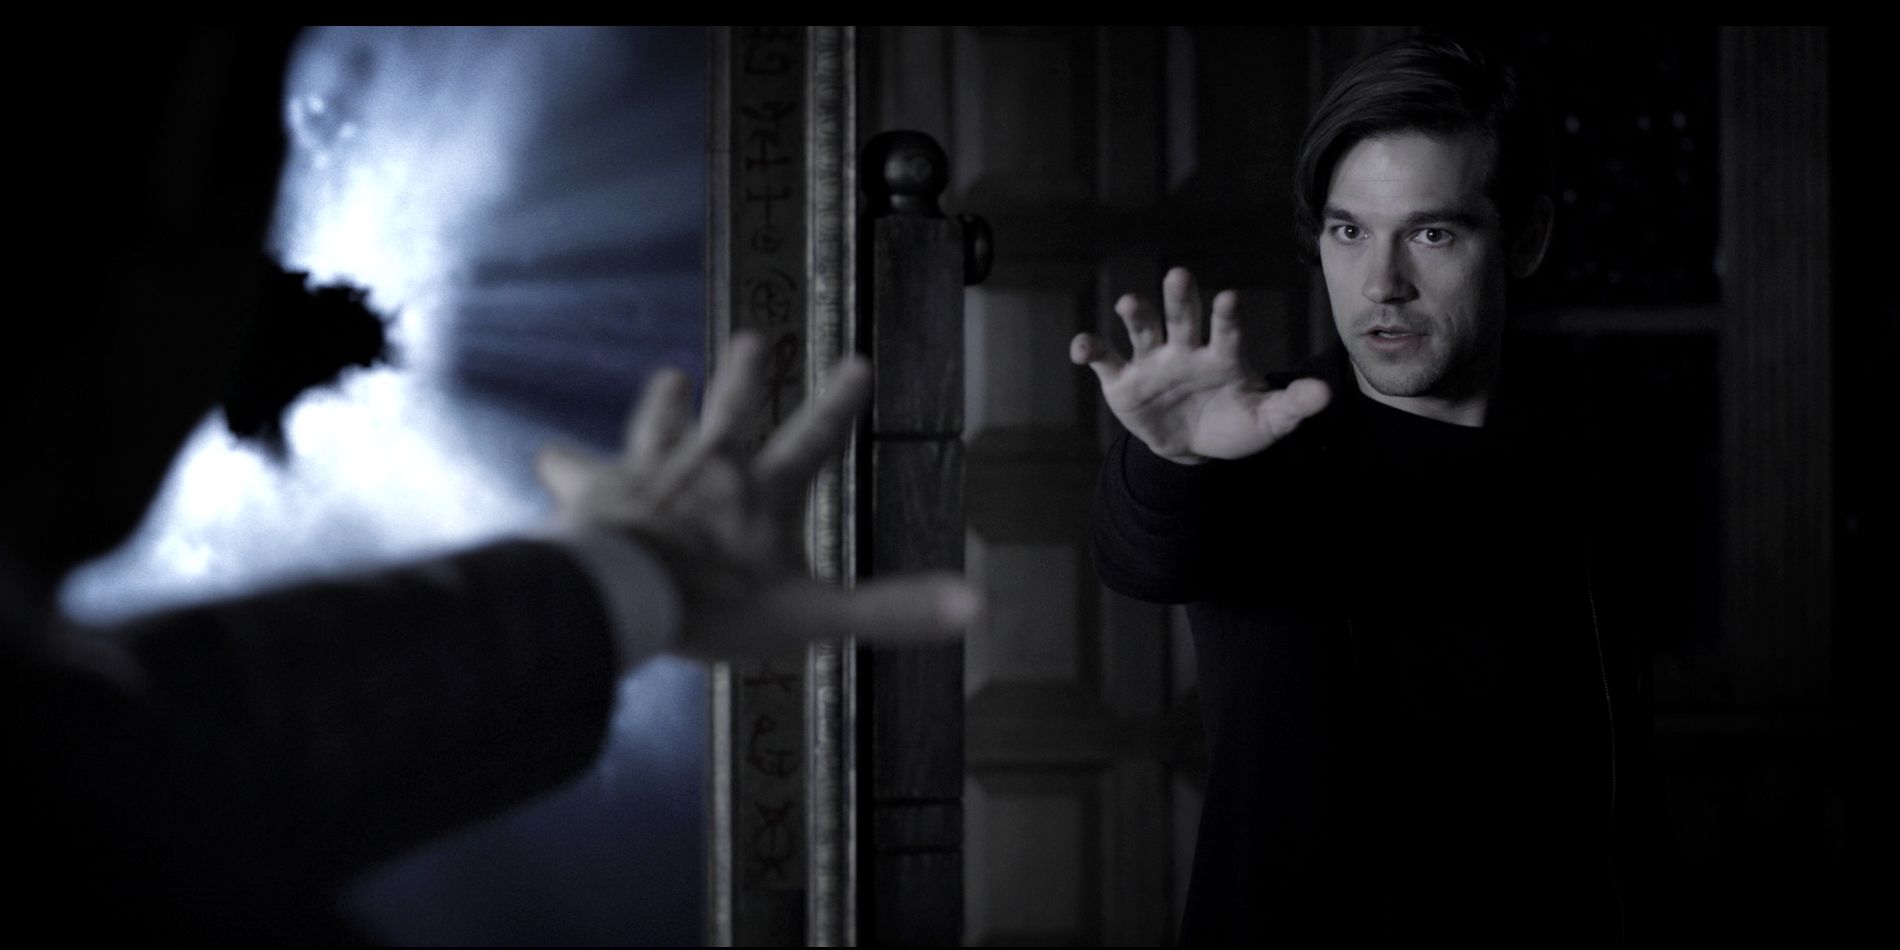 will the magicians show mirror the magicians land